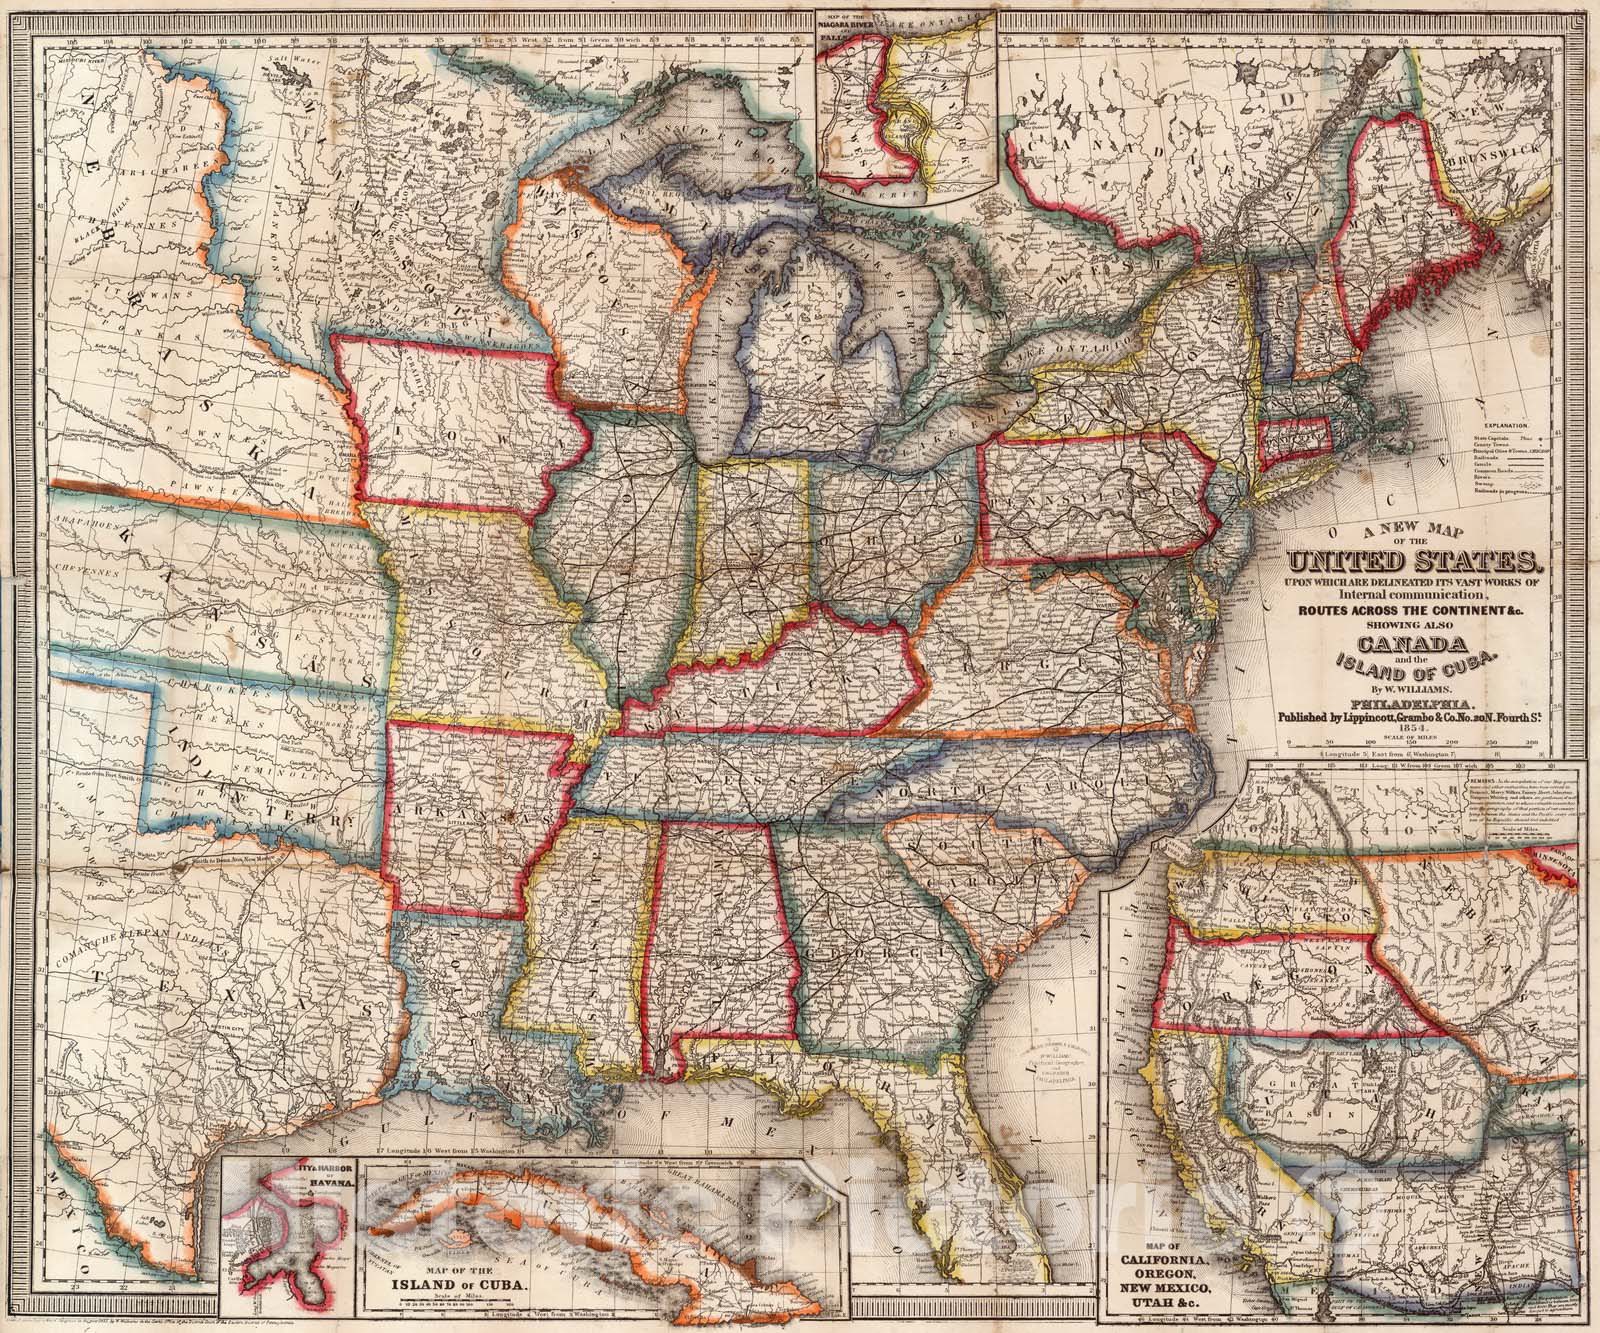 Historic Map : A New Map of the United States, 1854 - Vintage Wall Art